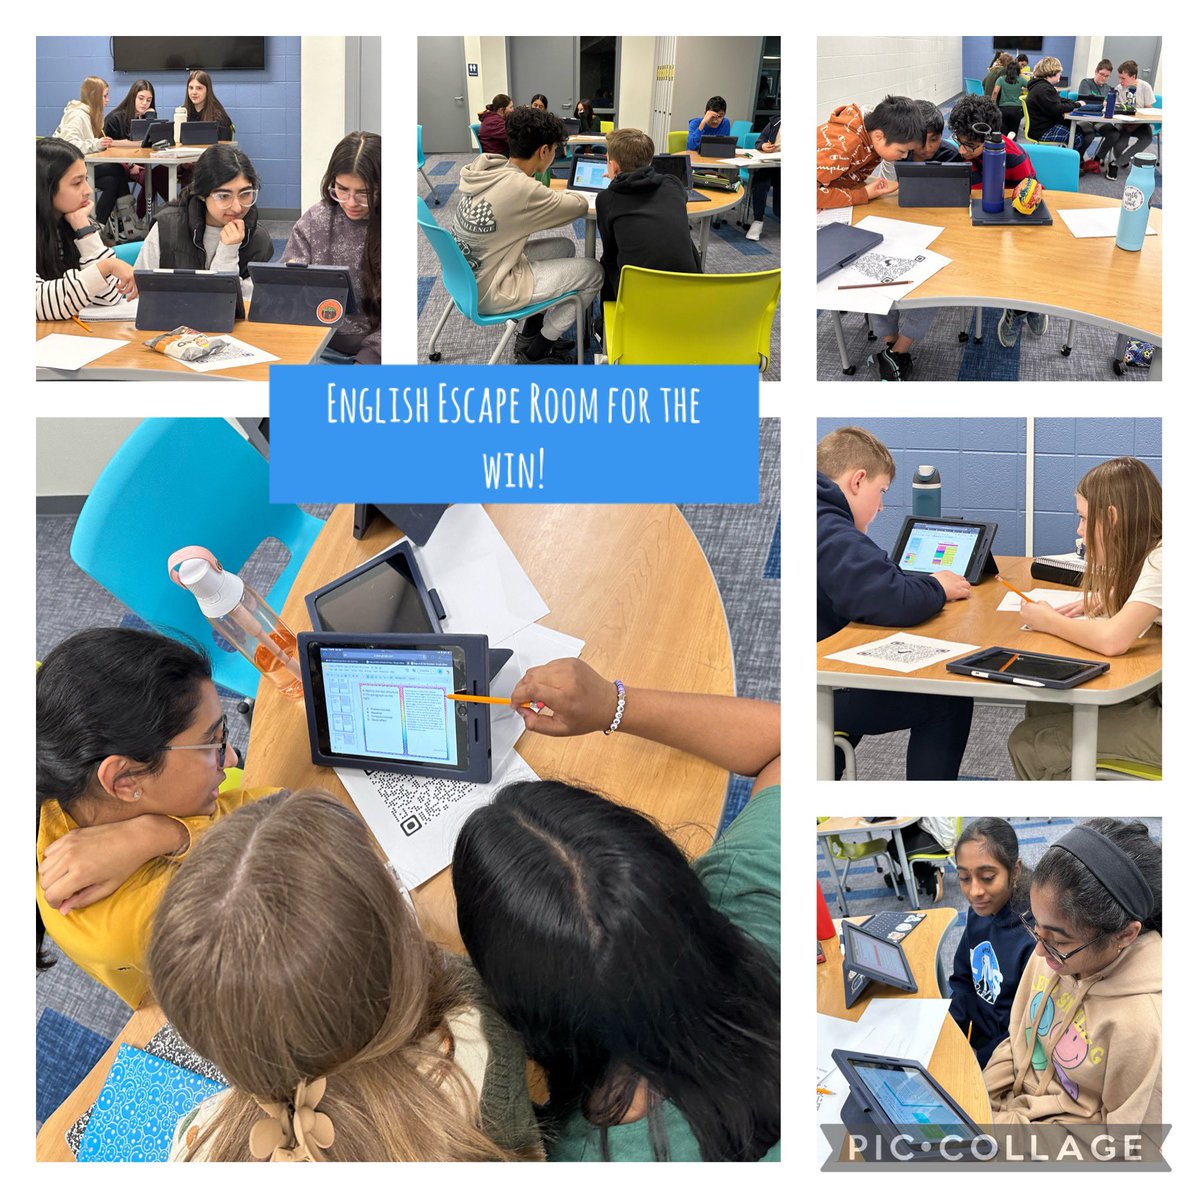 7th Grade English classes enjoyed using their Literary knowledge to decipher the codes to unlock 4 rooms today. Loved the opportunity to work with @MissMendola, @mulewicz17, and other 7th grade students. Such a great way to return from Spring Break. @LarsonMS